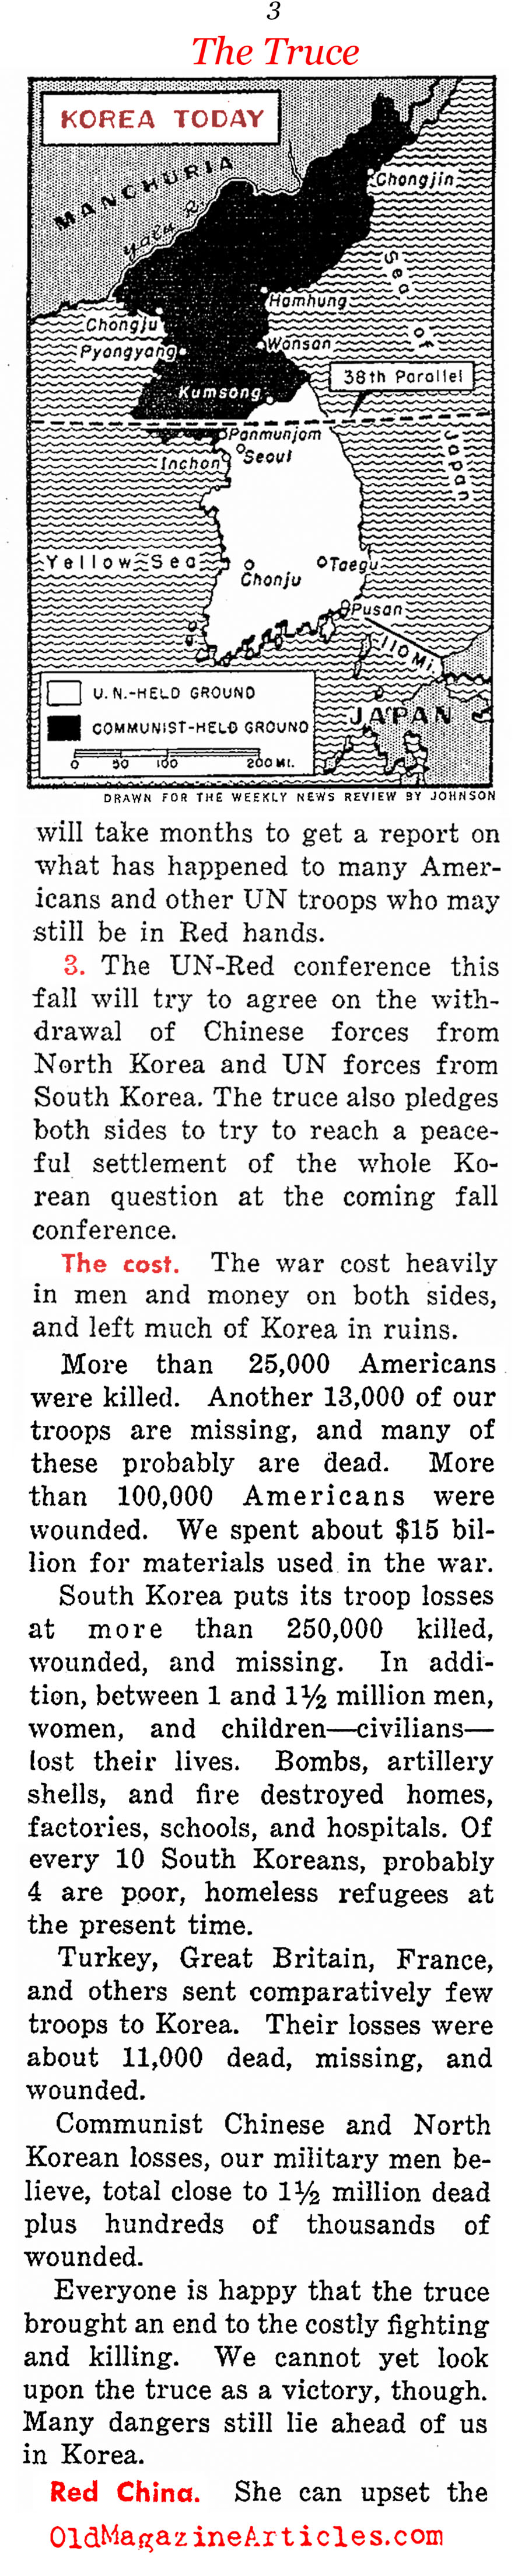 Fingers Crossed for a Lasting Peace (Weekly News Review, 1953)